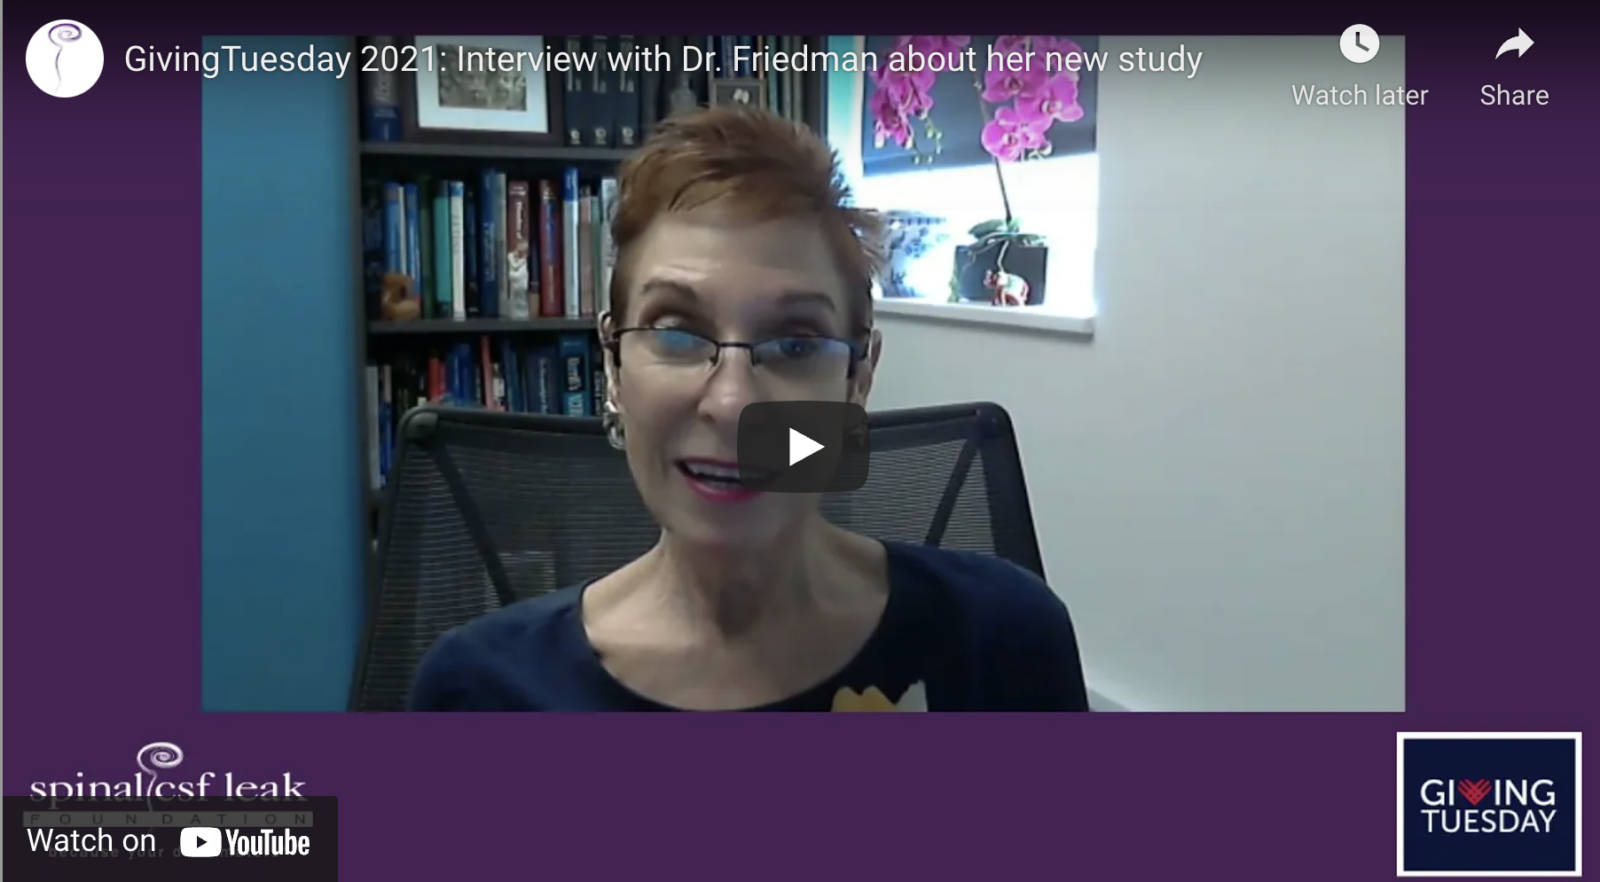 Image featuring Dr. Deborah Friedman giving an interview for GivingTuesday. The image links to a youtube video